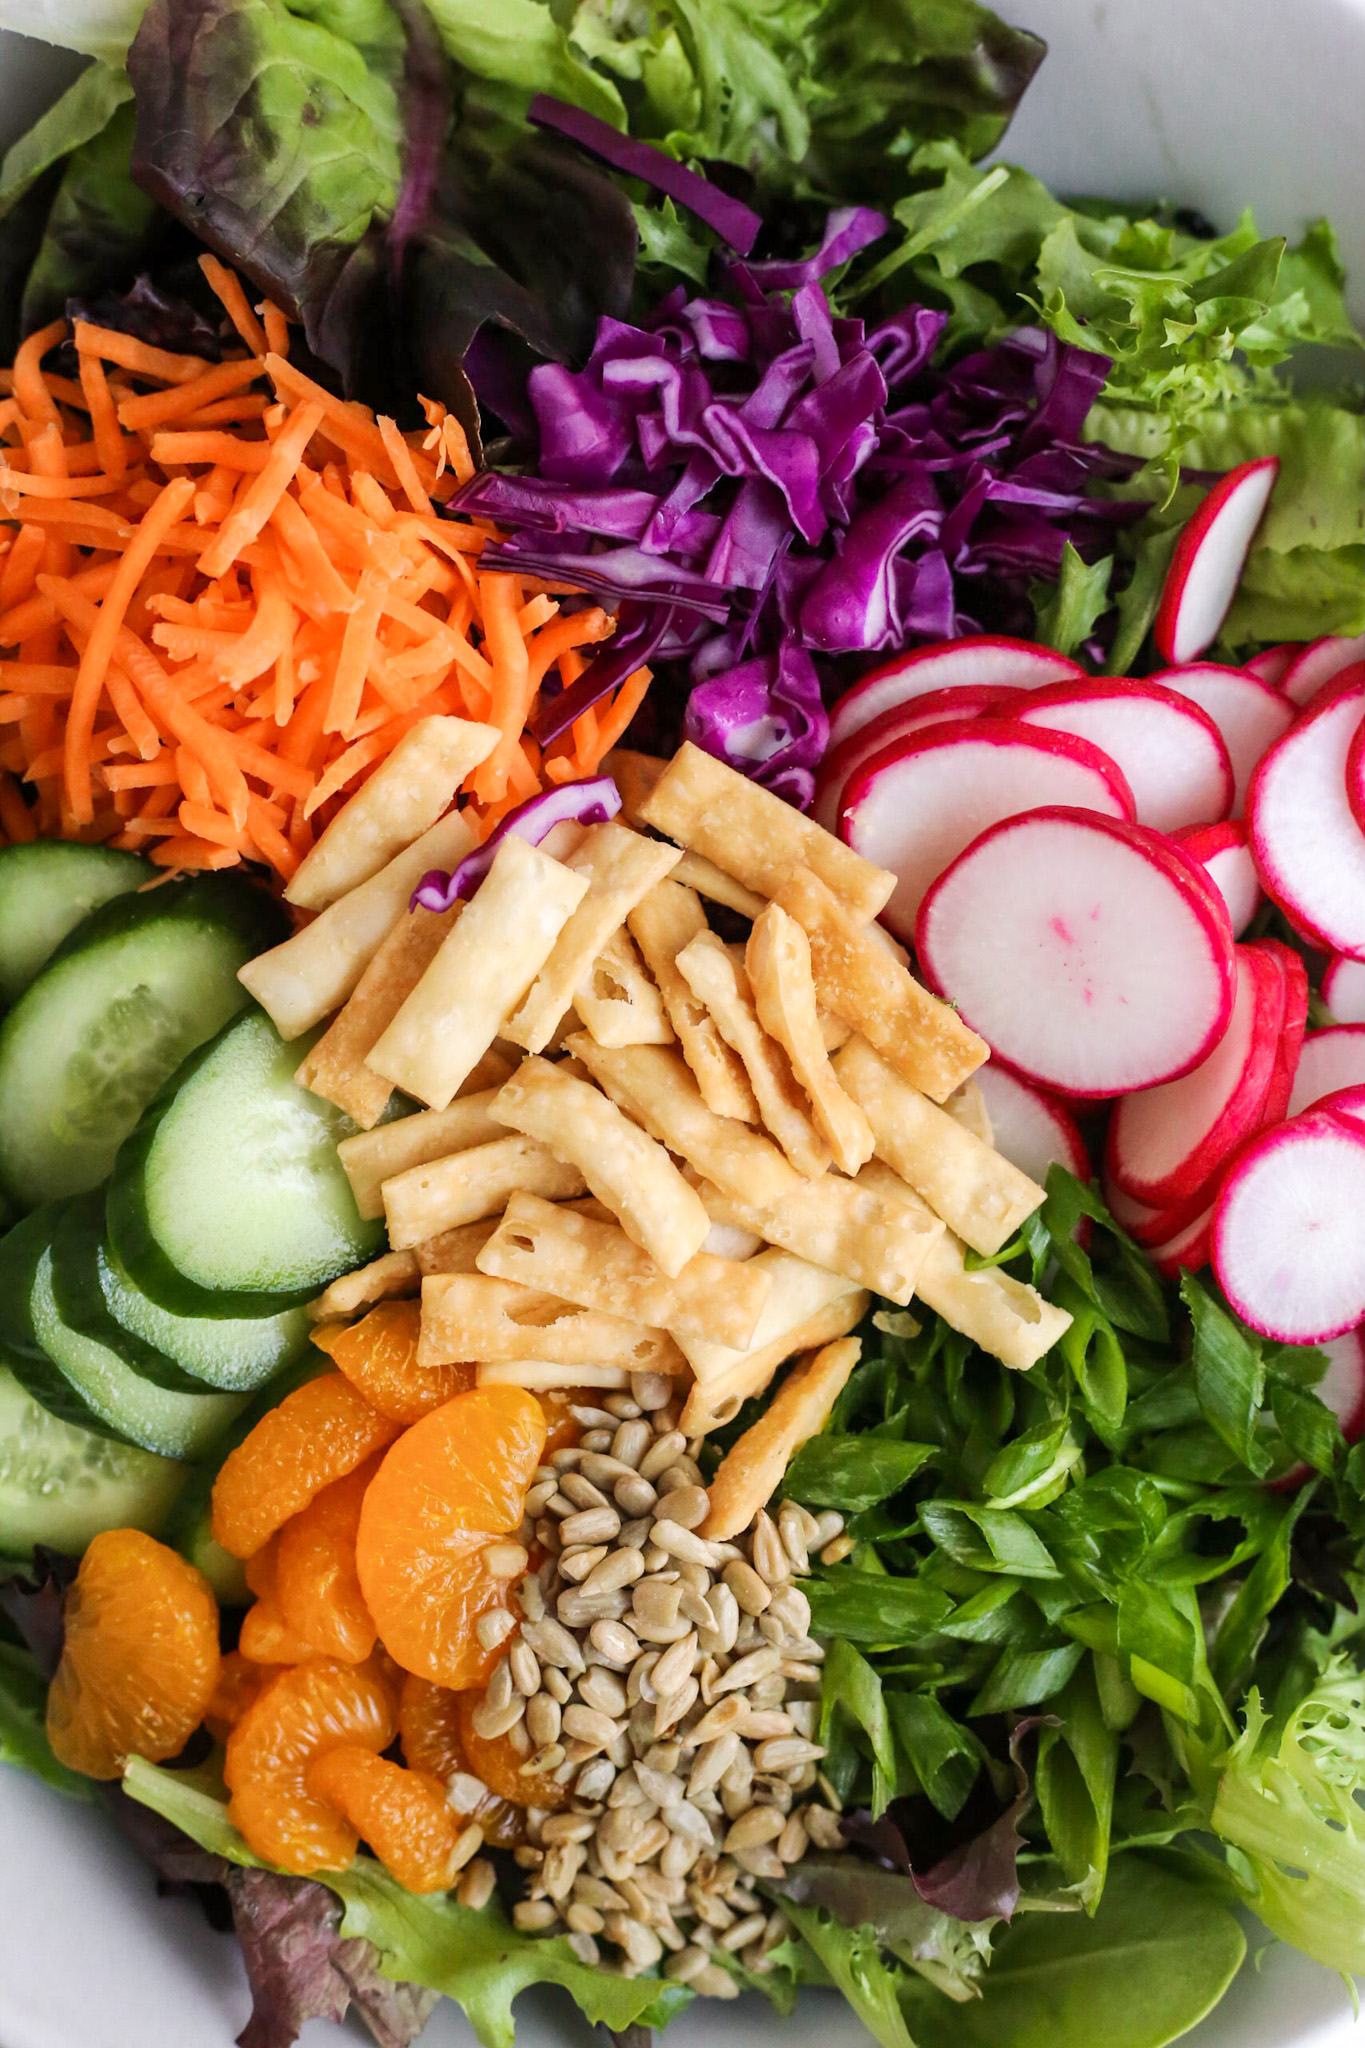 A close cropped view of an unmixed salad with wonton strips, matchstick carrots, shredded red cabbage, sliced radishes, sliced cucumbers, green onions, mandarin oranges, and sunflower seeds